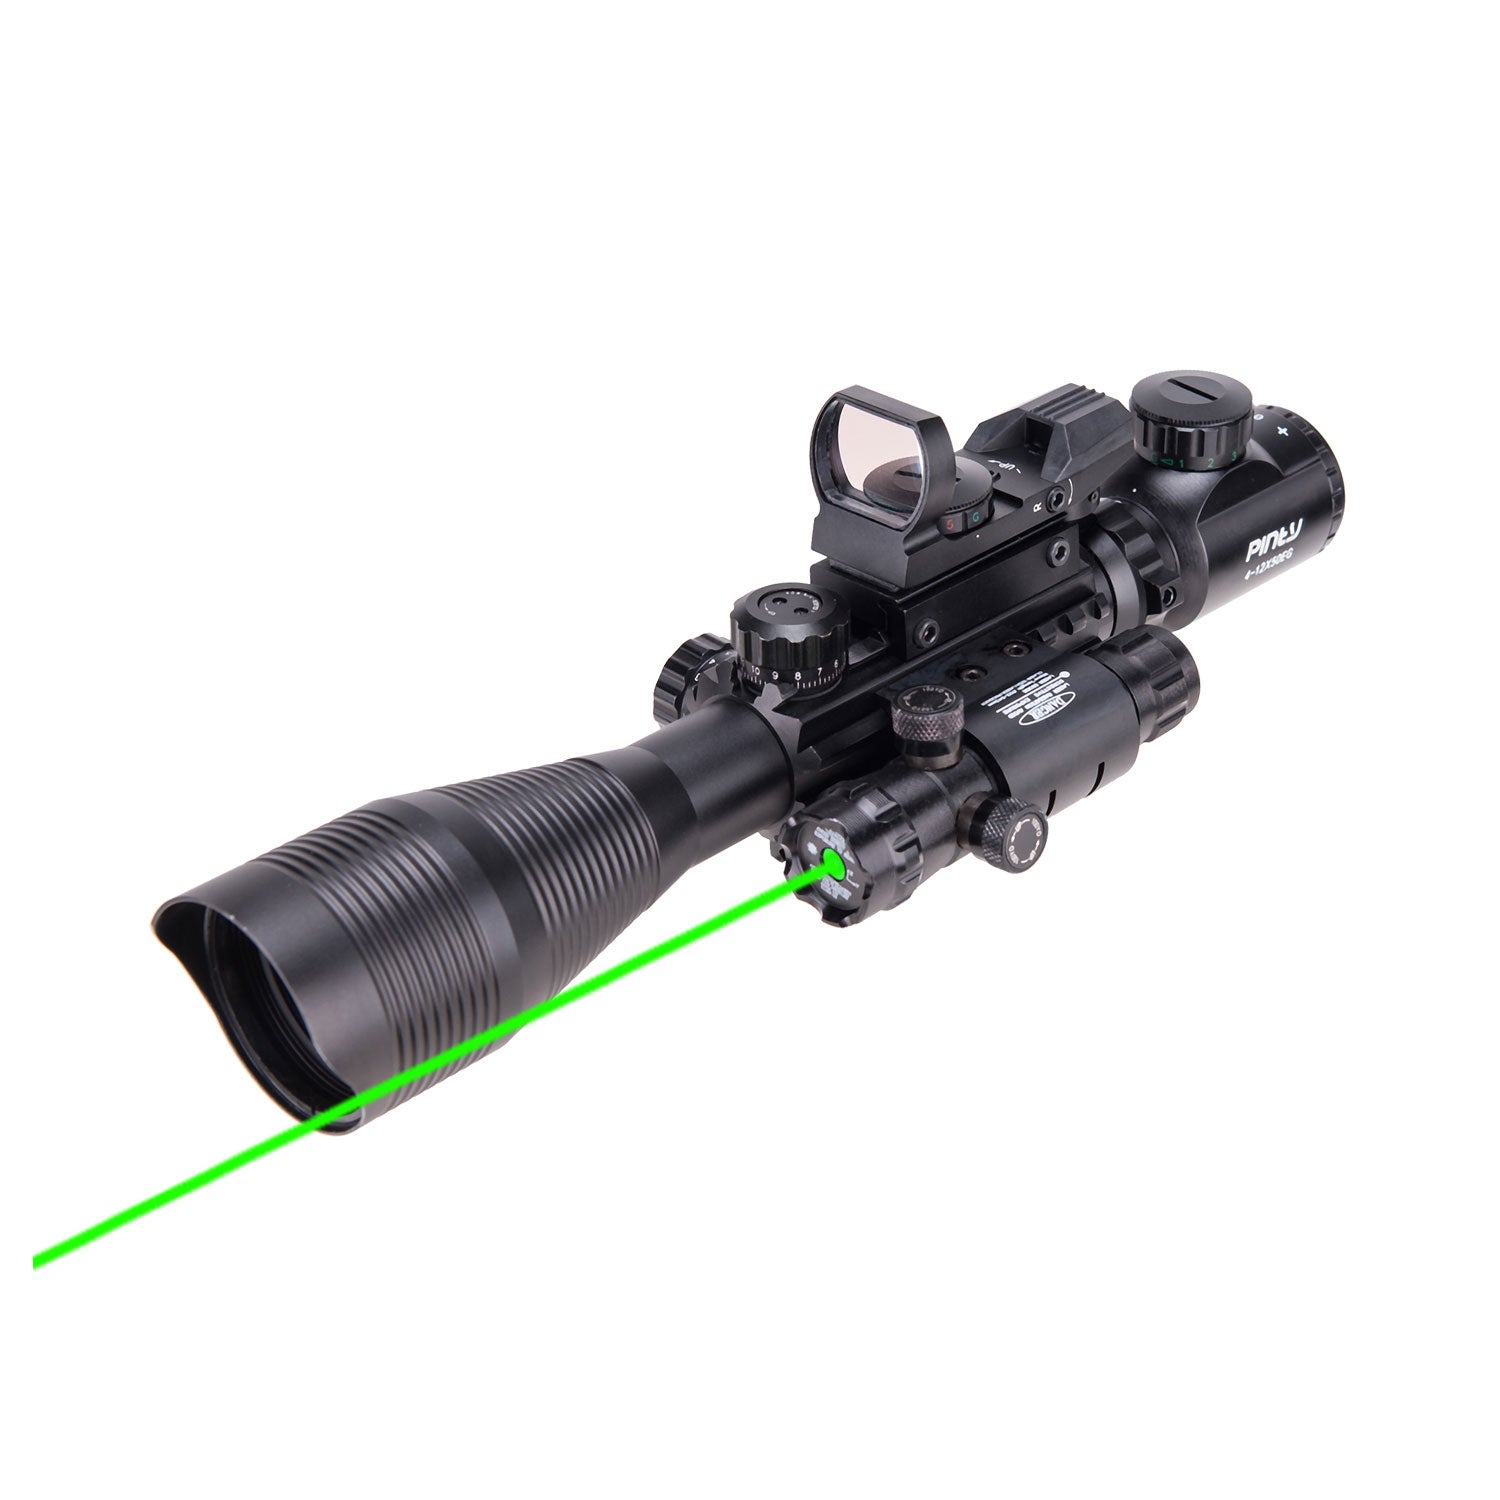 Pinty 3-in-1 Rifle Scope Combo, 4-12x50mm Rangefinder Scope, Red&Green Reflex Sight, Green Laser